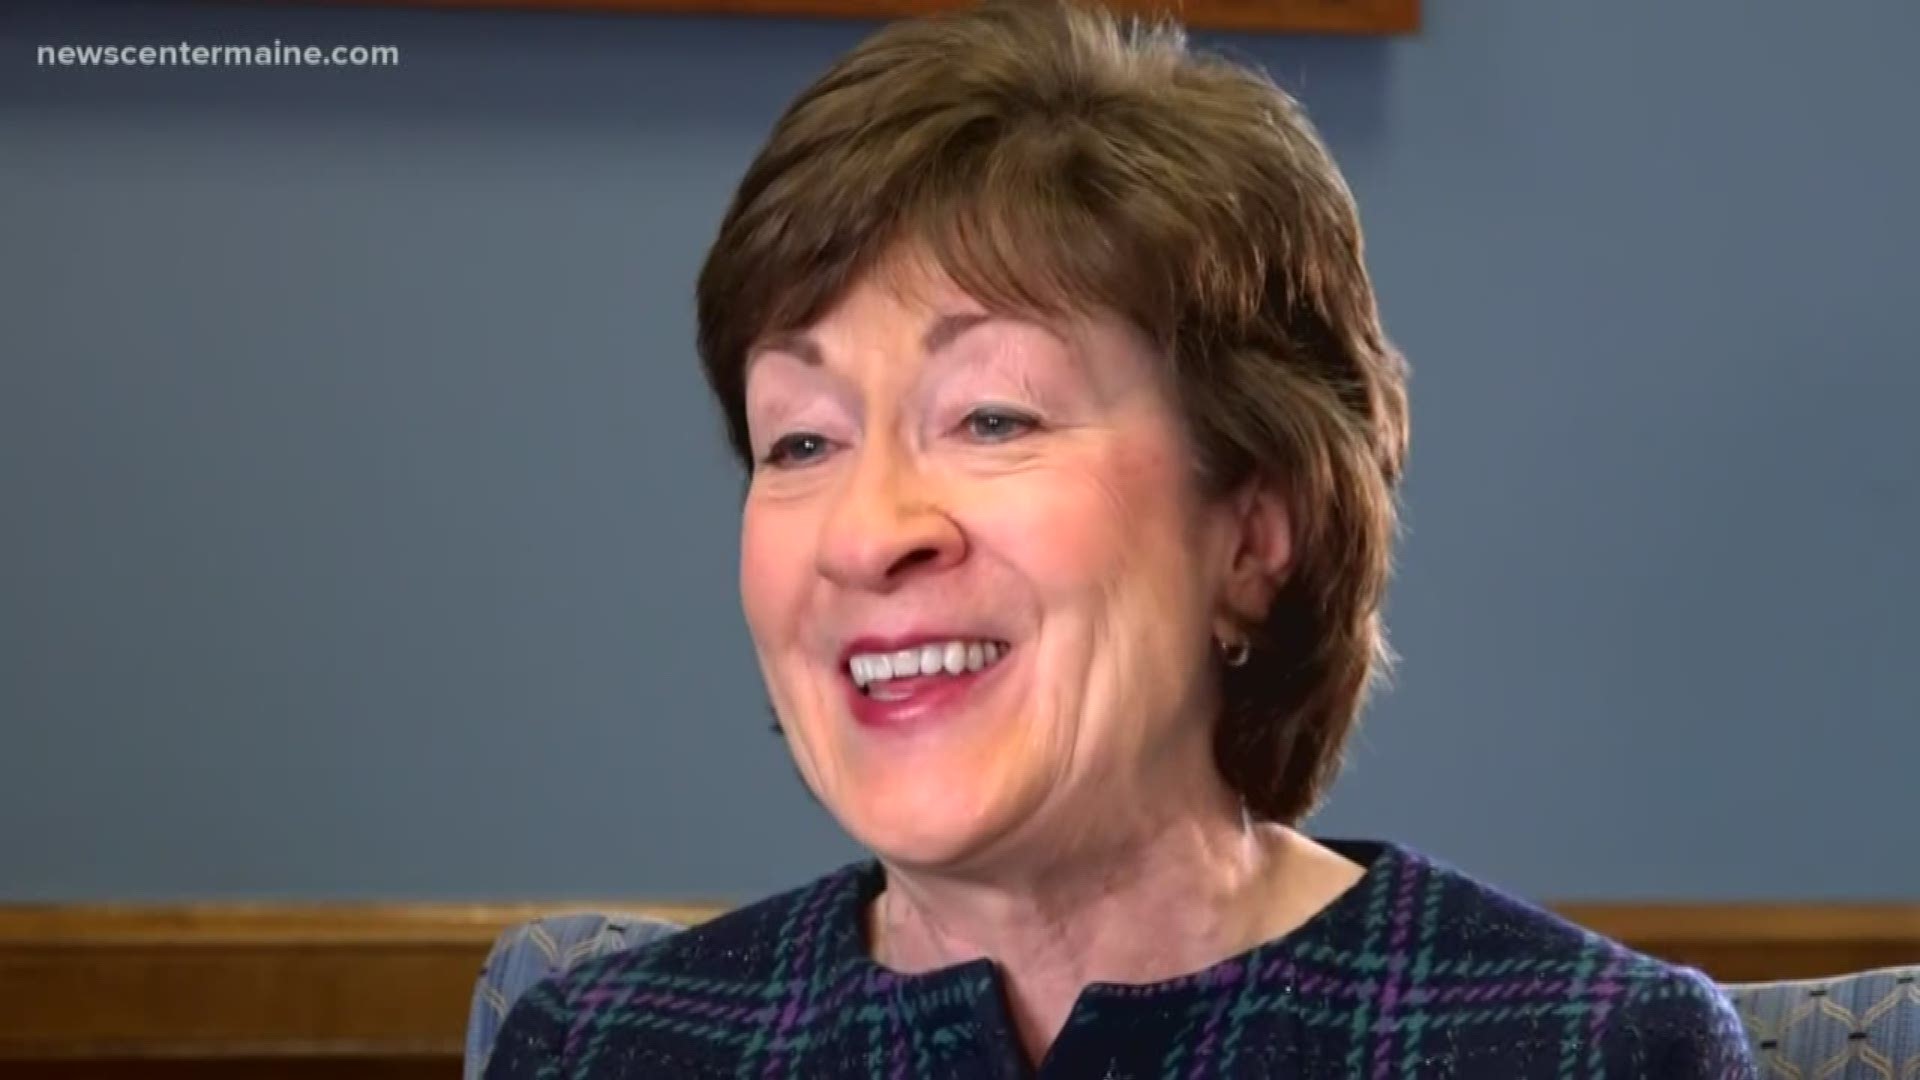 Many have criticized Senator Susan Collins for still now taking a stronger position on the impeachment of President Trump but she says she is paying close attention.